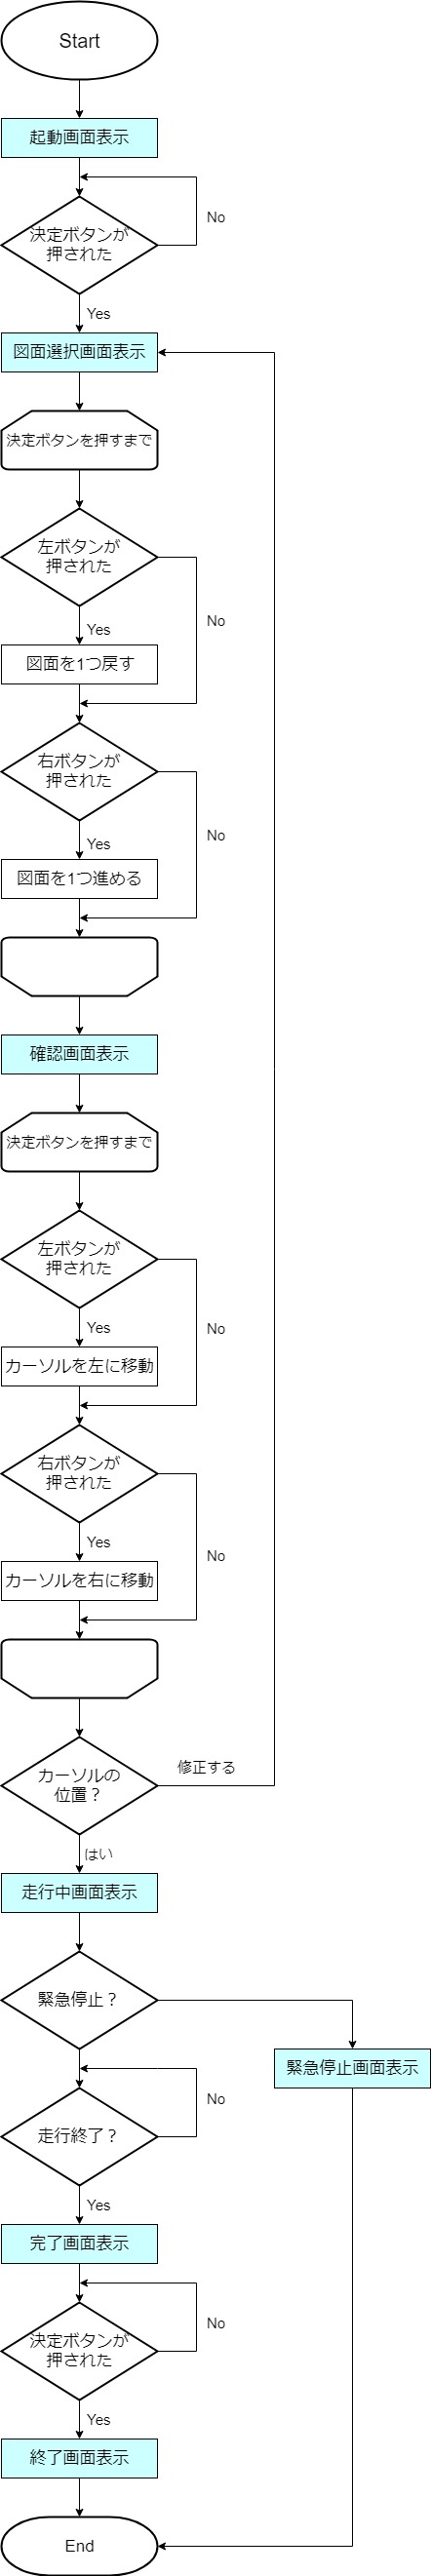 Fig.12 ソフト